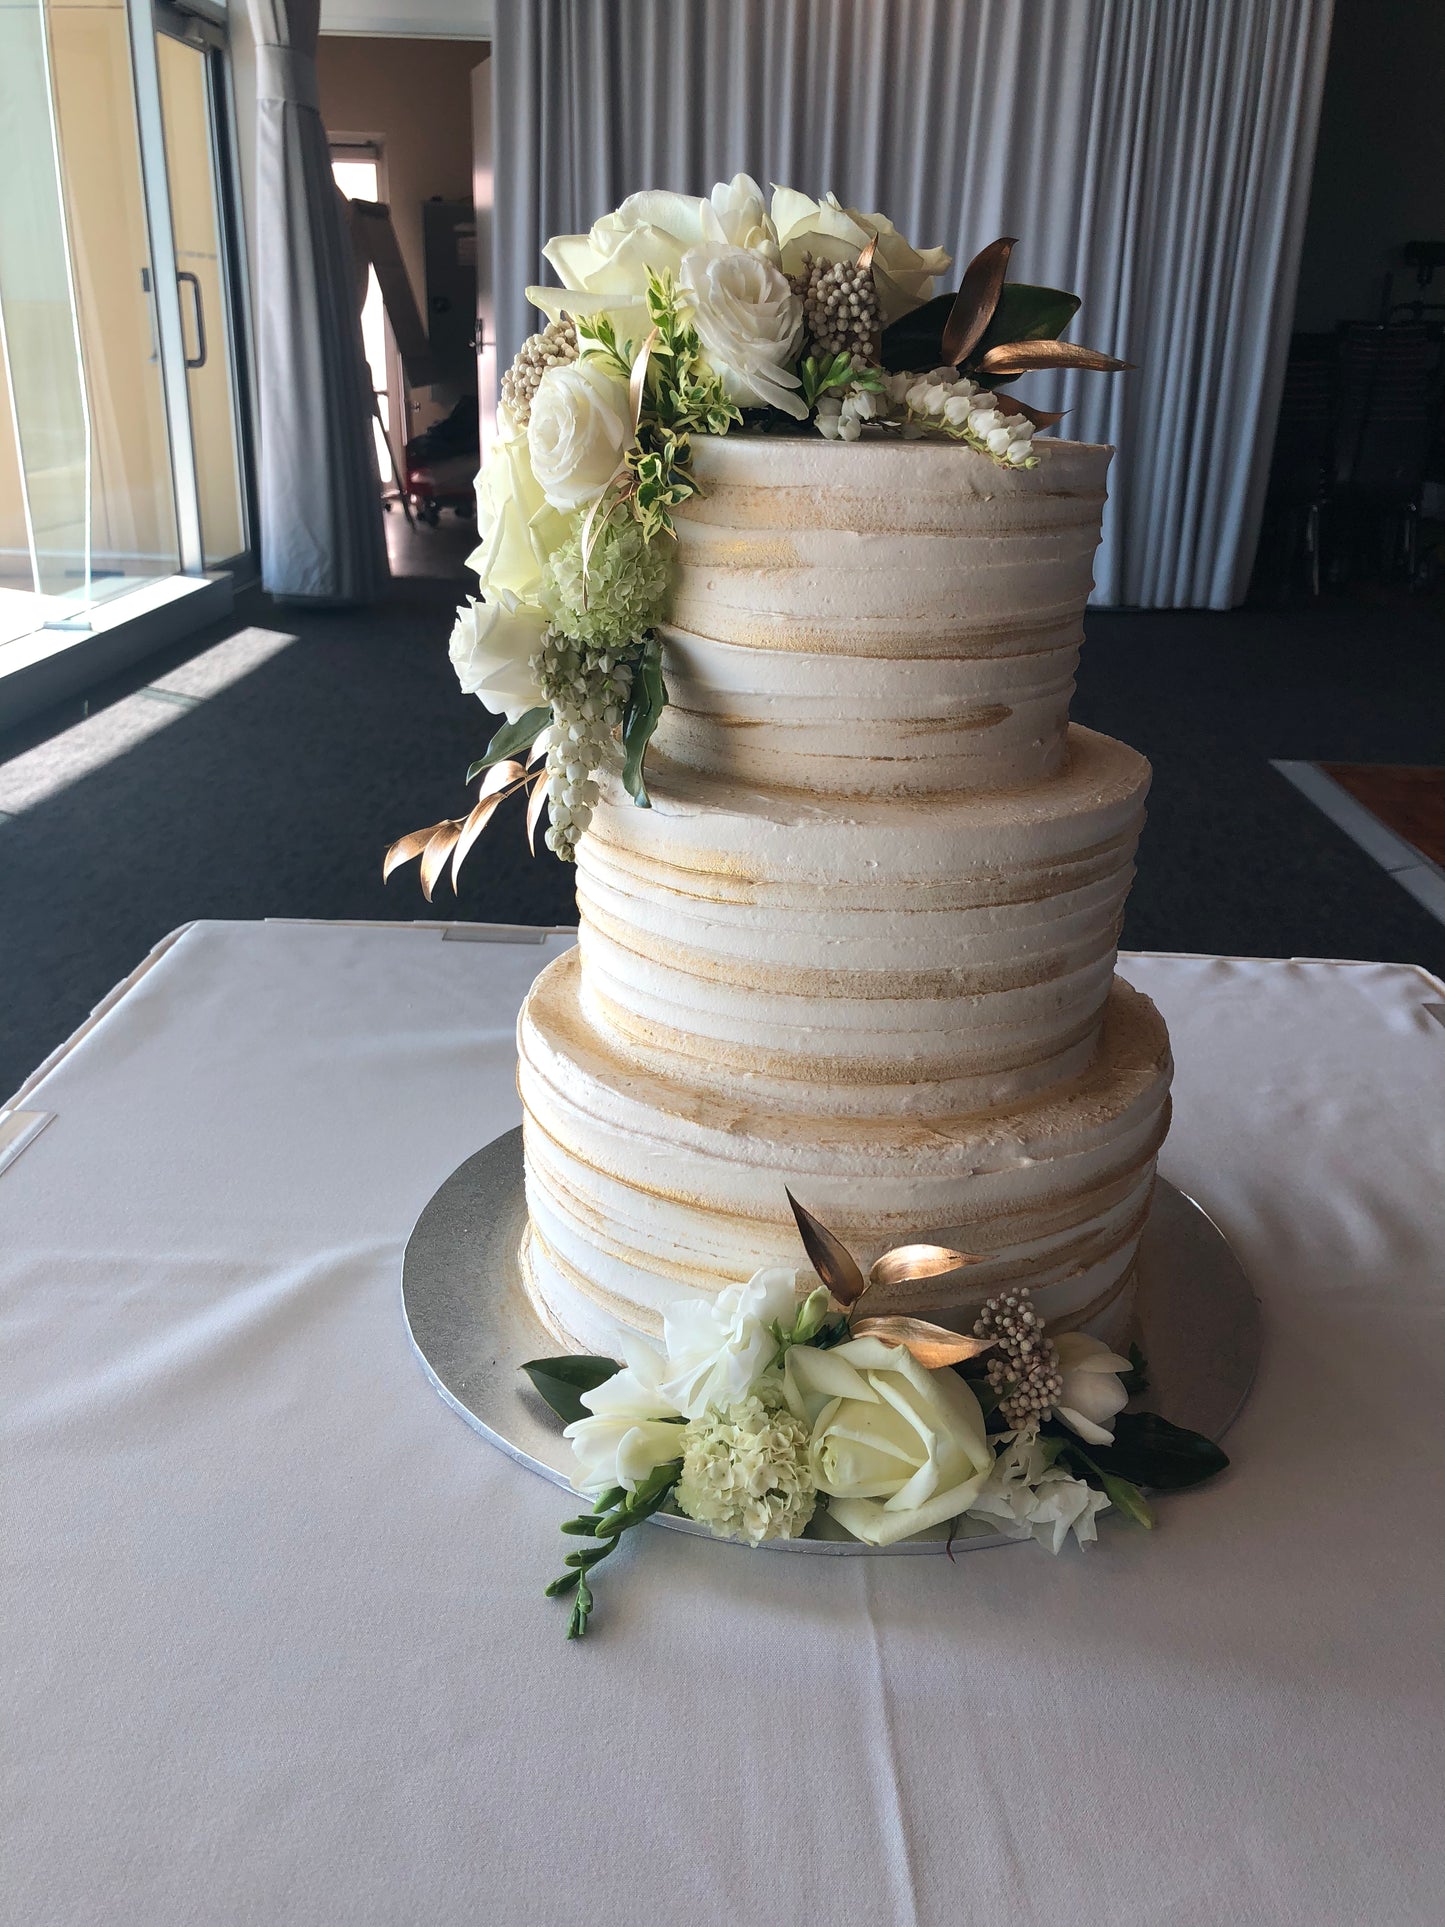 3 Tier Line Buttercream with Brush of Gold and White Flowers